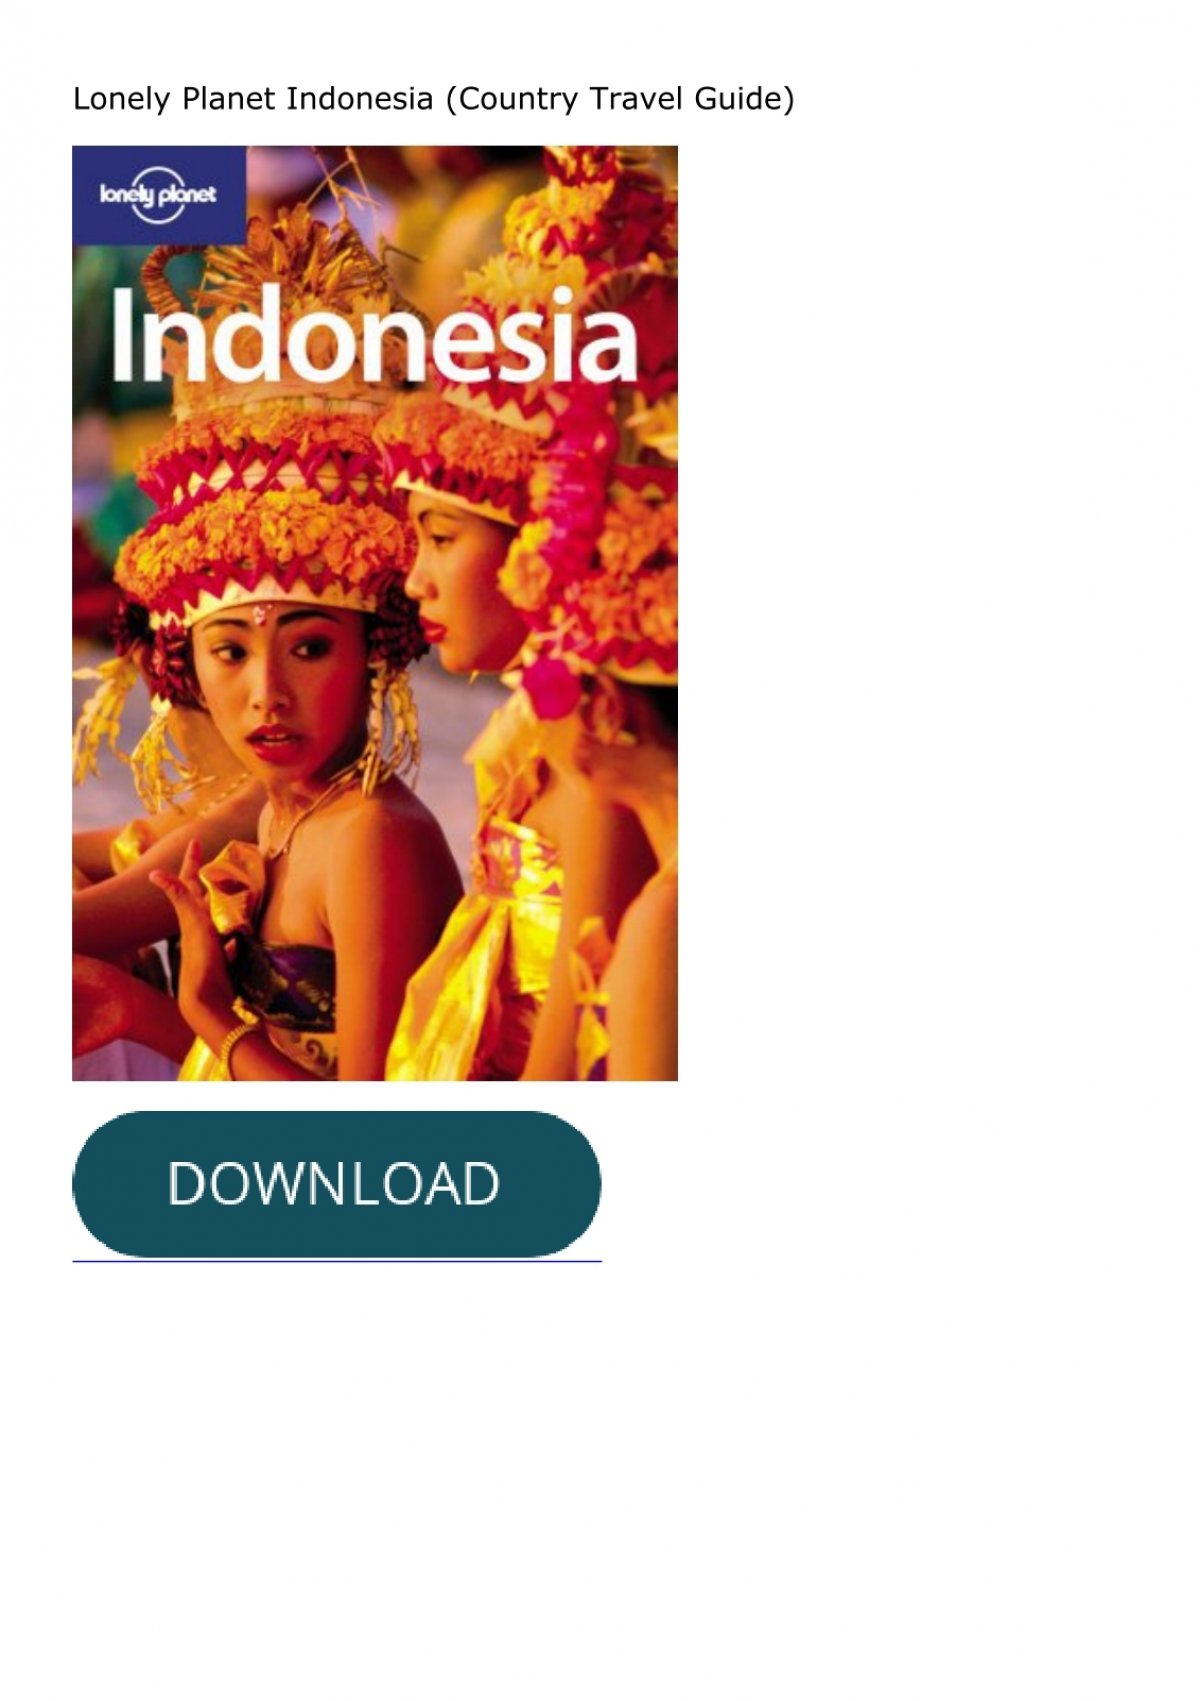 ⚡️Download ⚡️ Lonely Planet Indonesia (Country Travel Guide)